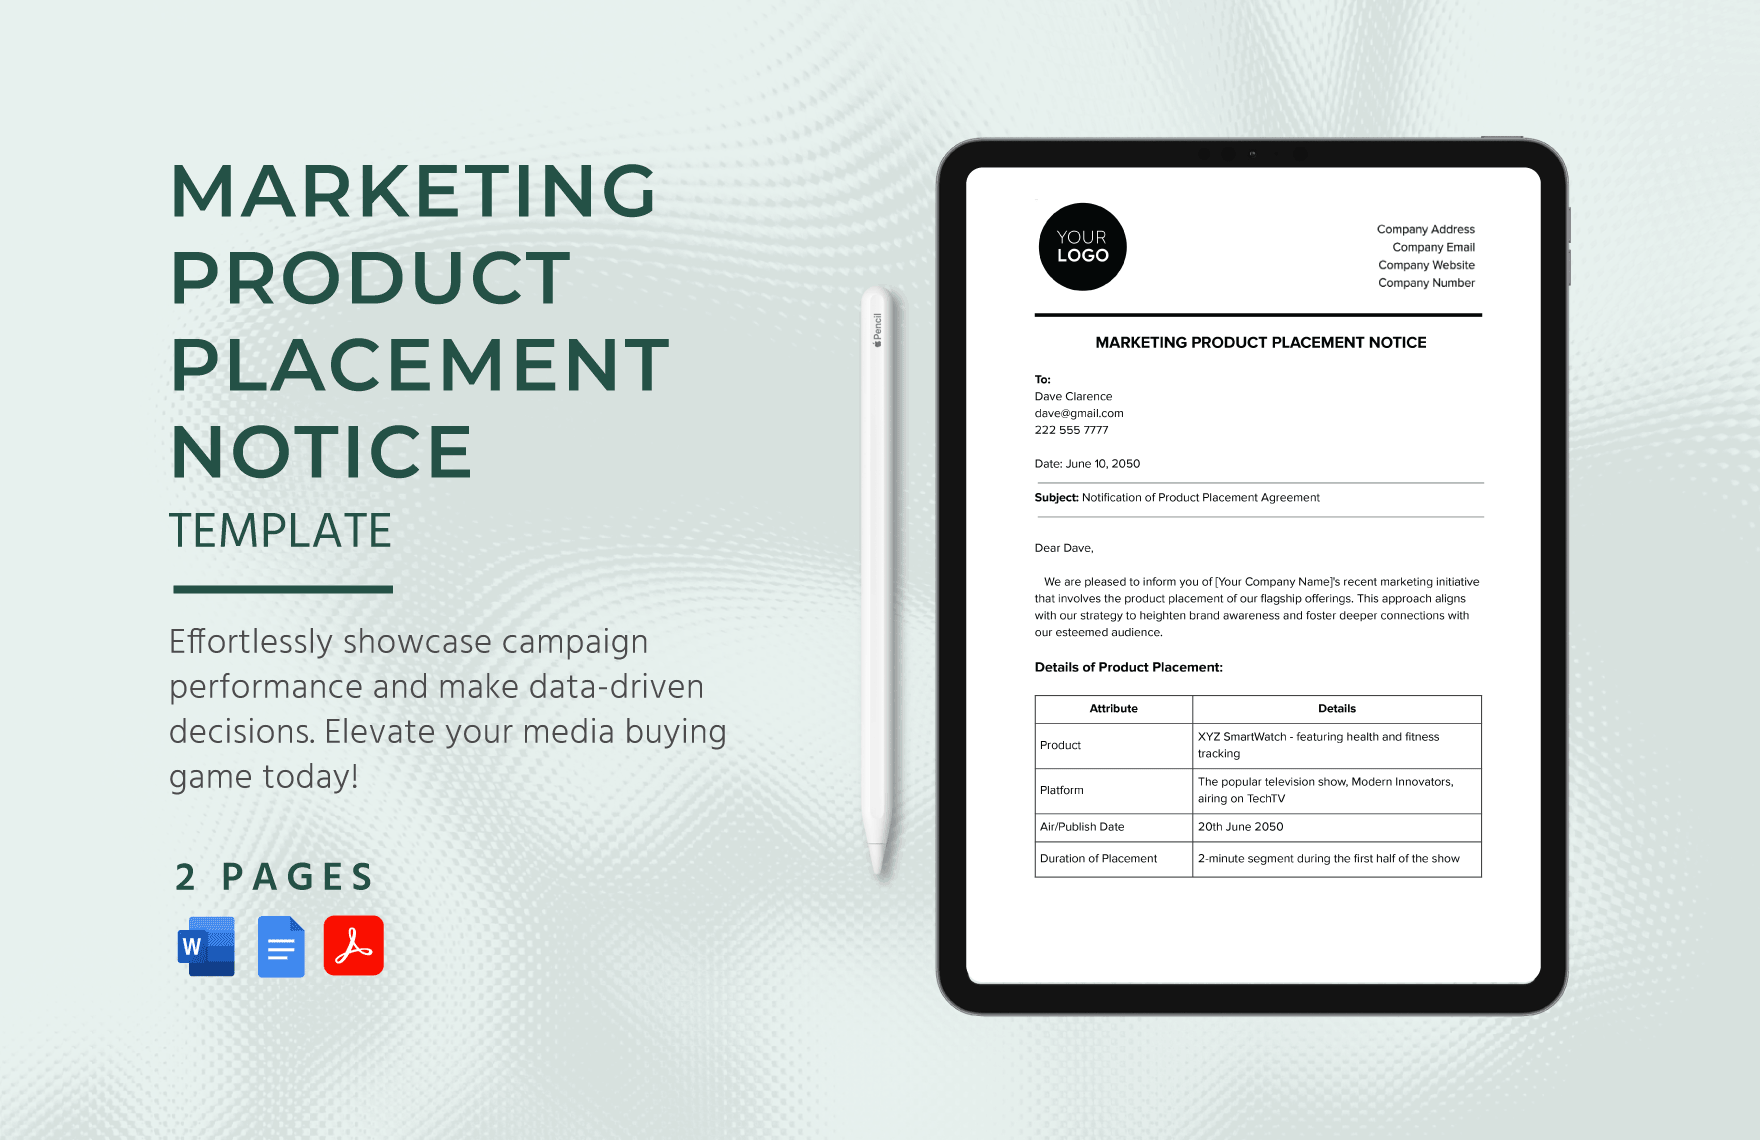 Marketing Product Placement Notice Template in Word, Google Docs, PDF